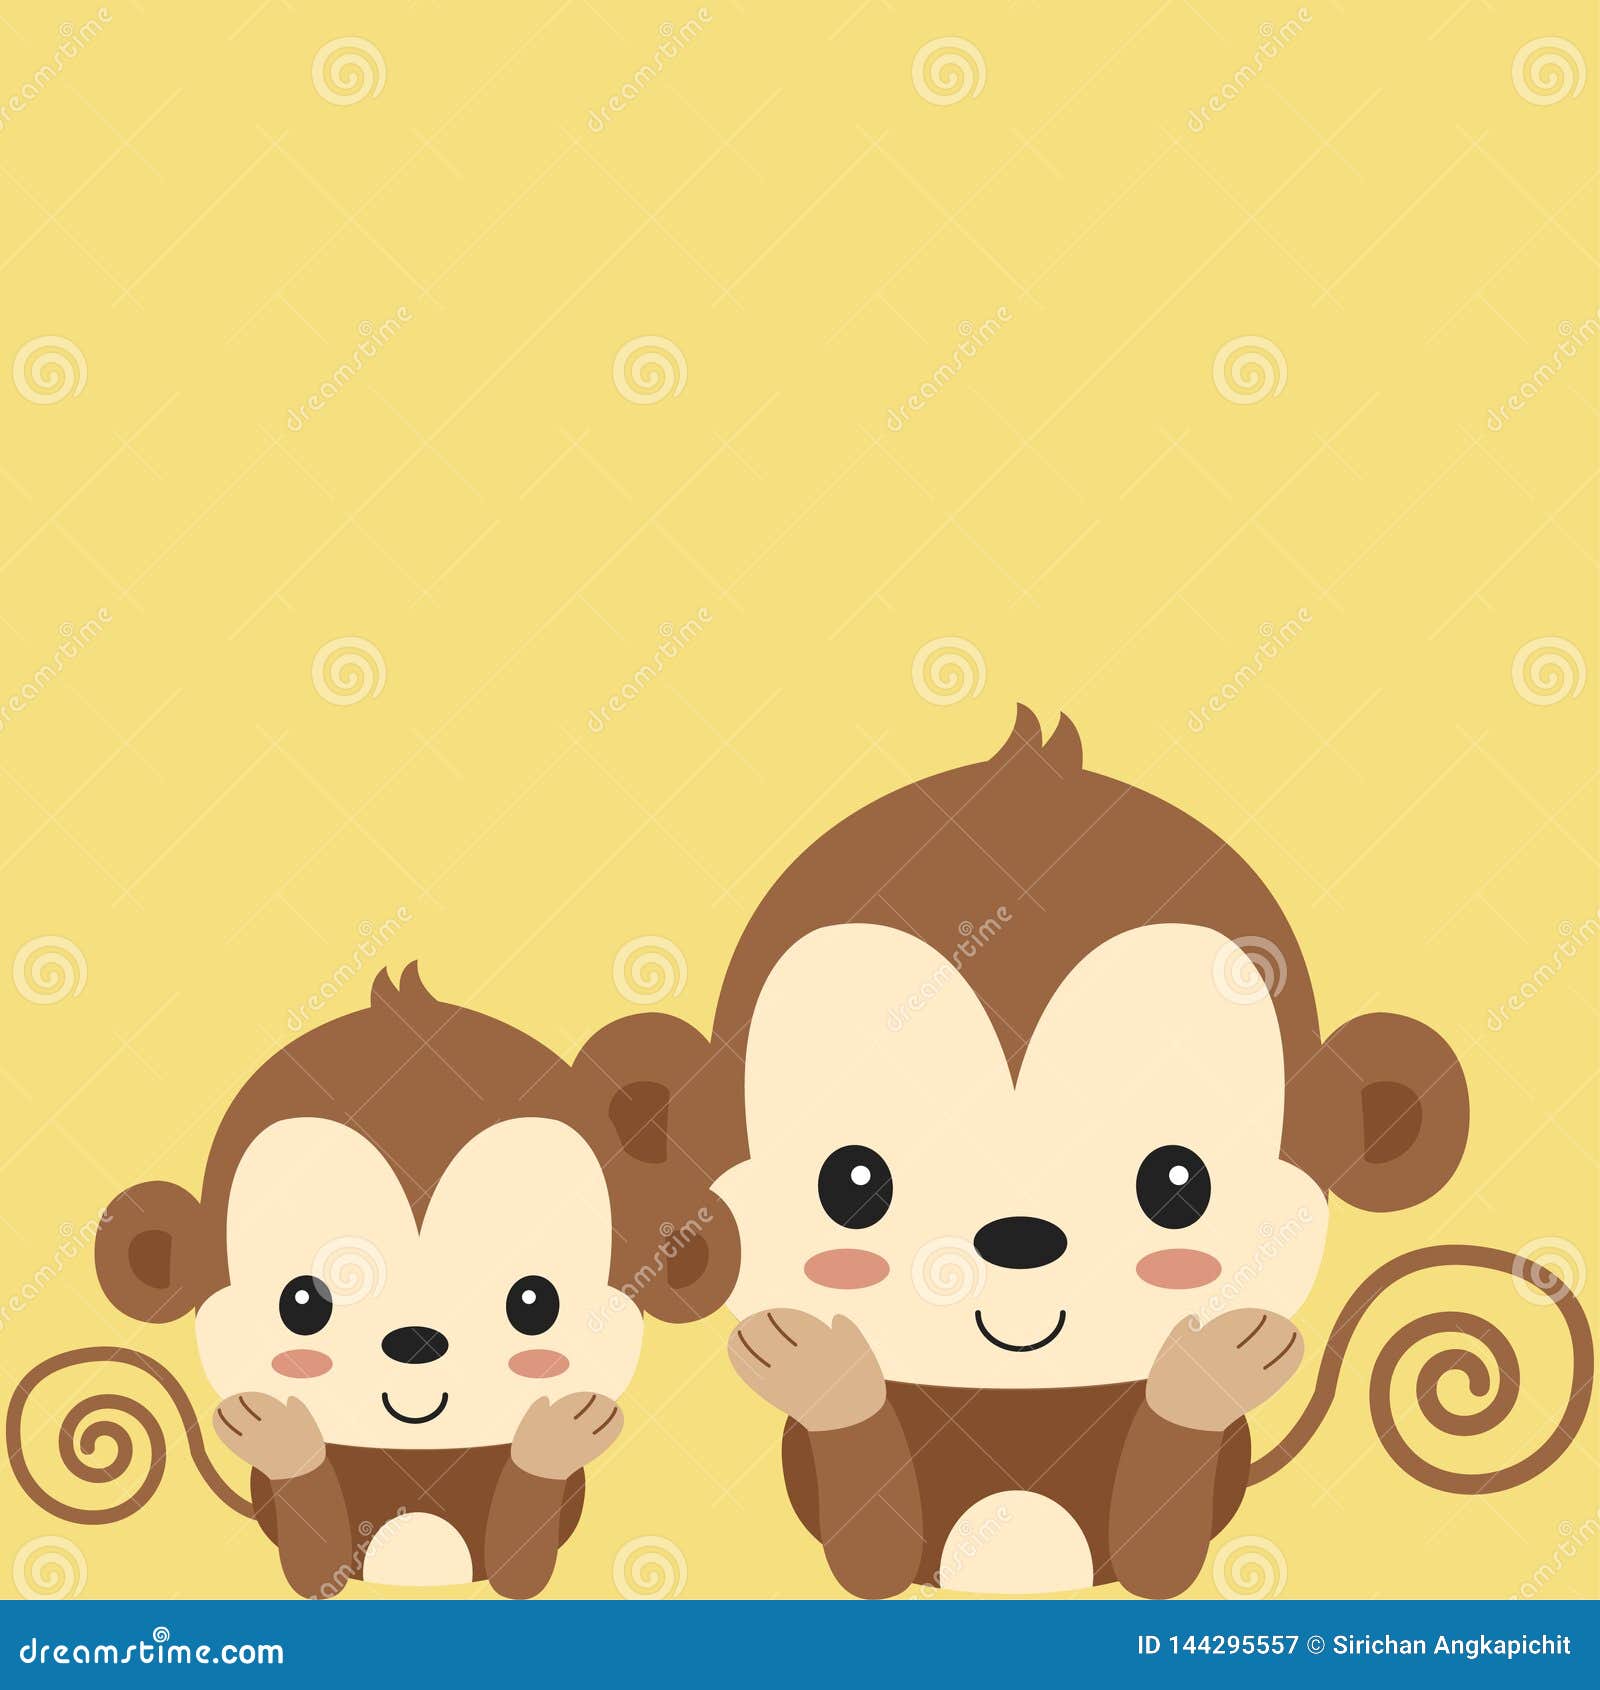 Cute Mom And Baby Monkey Cartoon Stock Vector Illustration Of Child Character